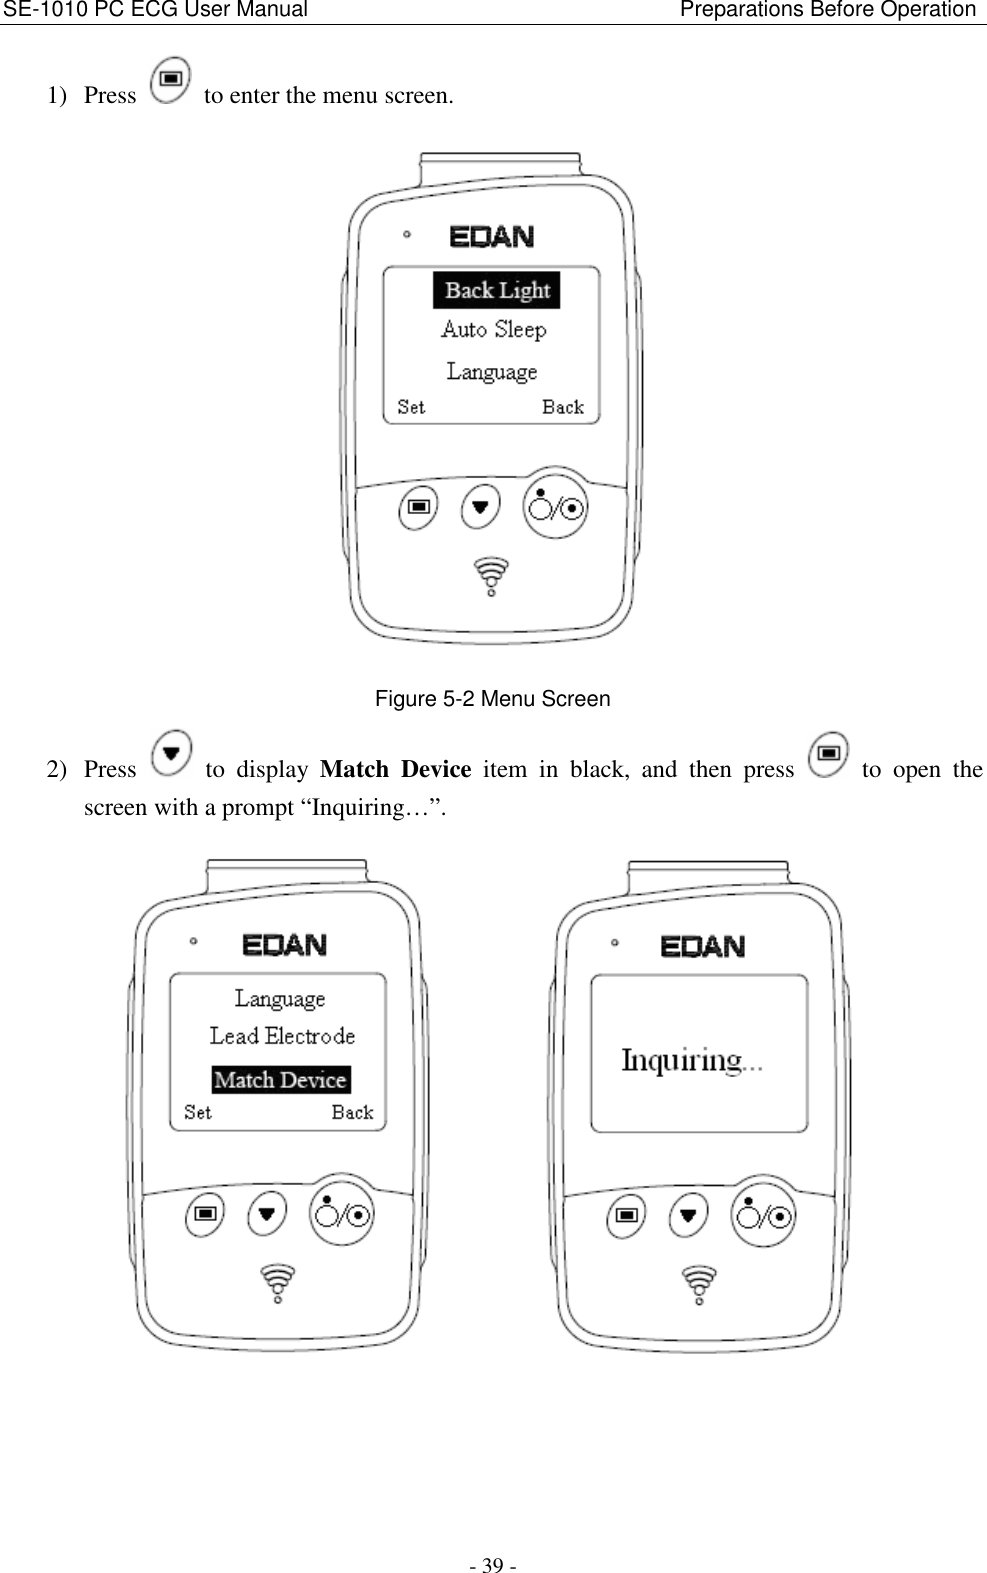 SE-1010 PC ECG User Manual                                                                    Preparations Before Operation - 39 - 1) Press    to enter the menu screen.    Figure 5-2 Menu Screen   2) Press    to  display  Match  Device  item  in  black,  and  then  press    to  open  the screen with a prompt “Inquiring…”.          